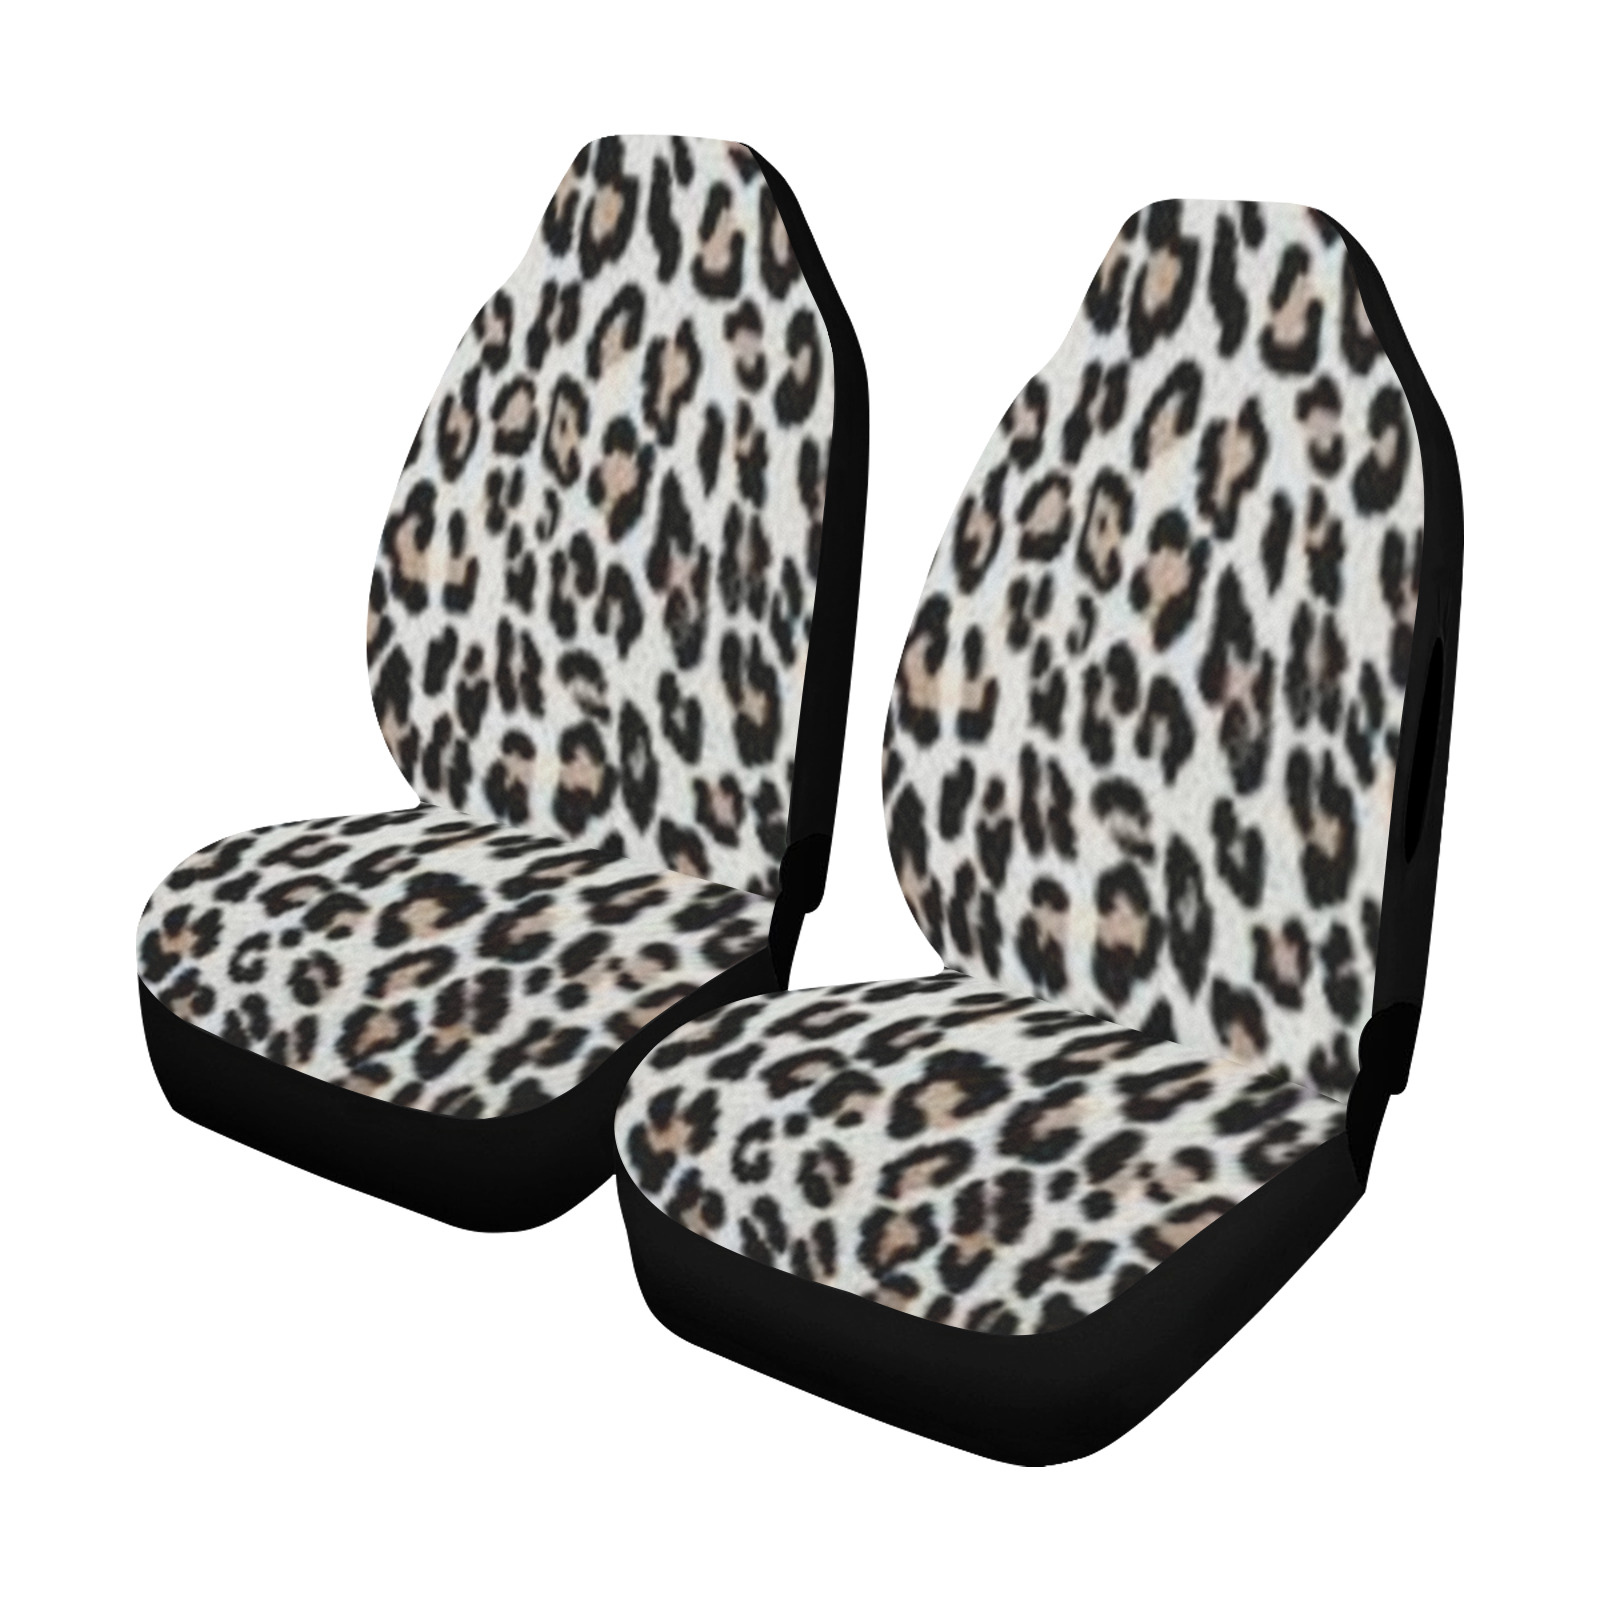 LEOPARD STYLE CAR CHAIR COVER Car Seat Cover Airbag Compatible (Set of 2)